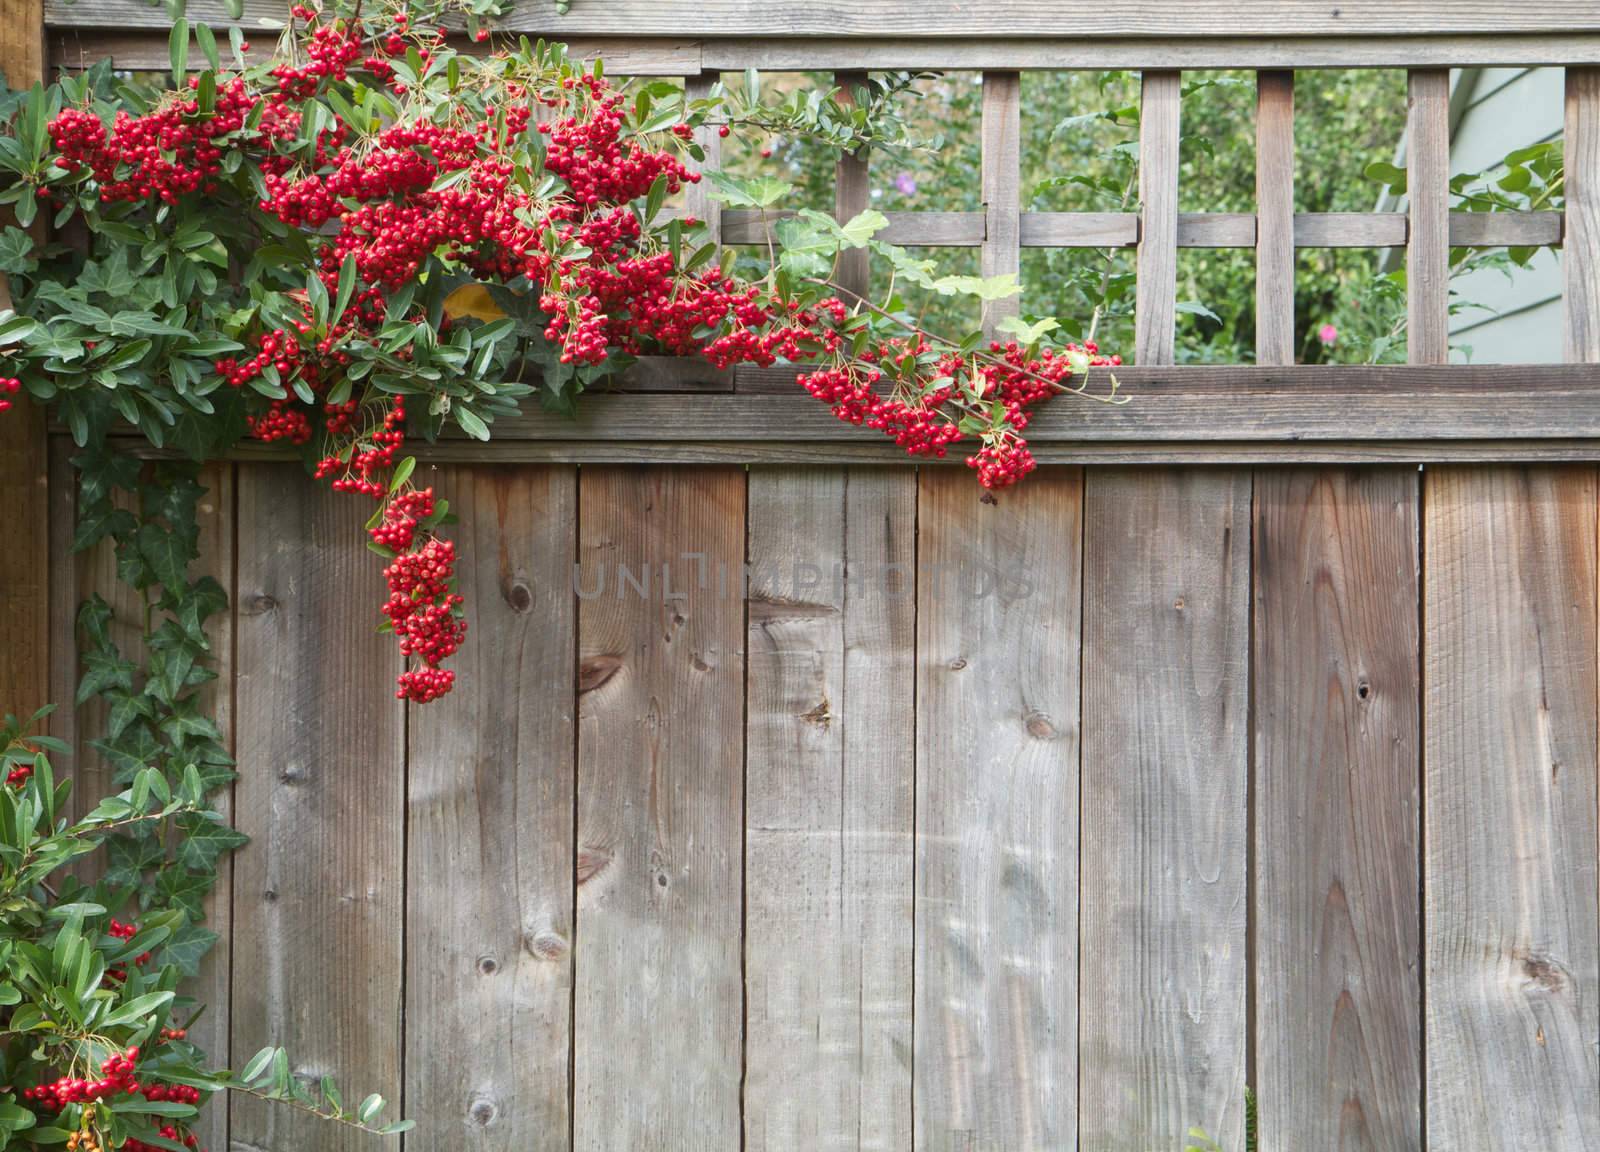 Pyracantha plant climbing on and over a redwood fence with red berries